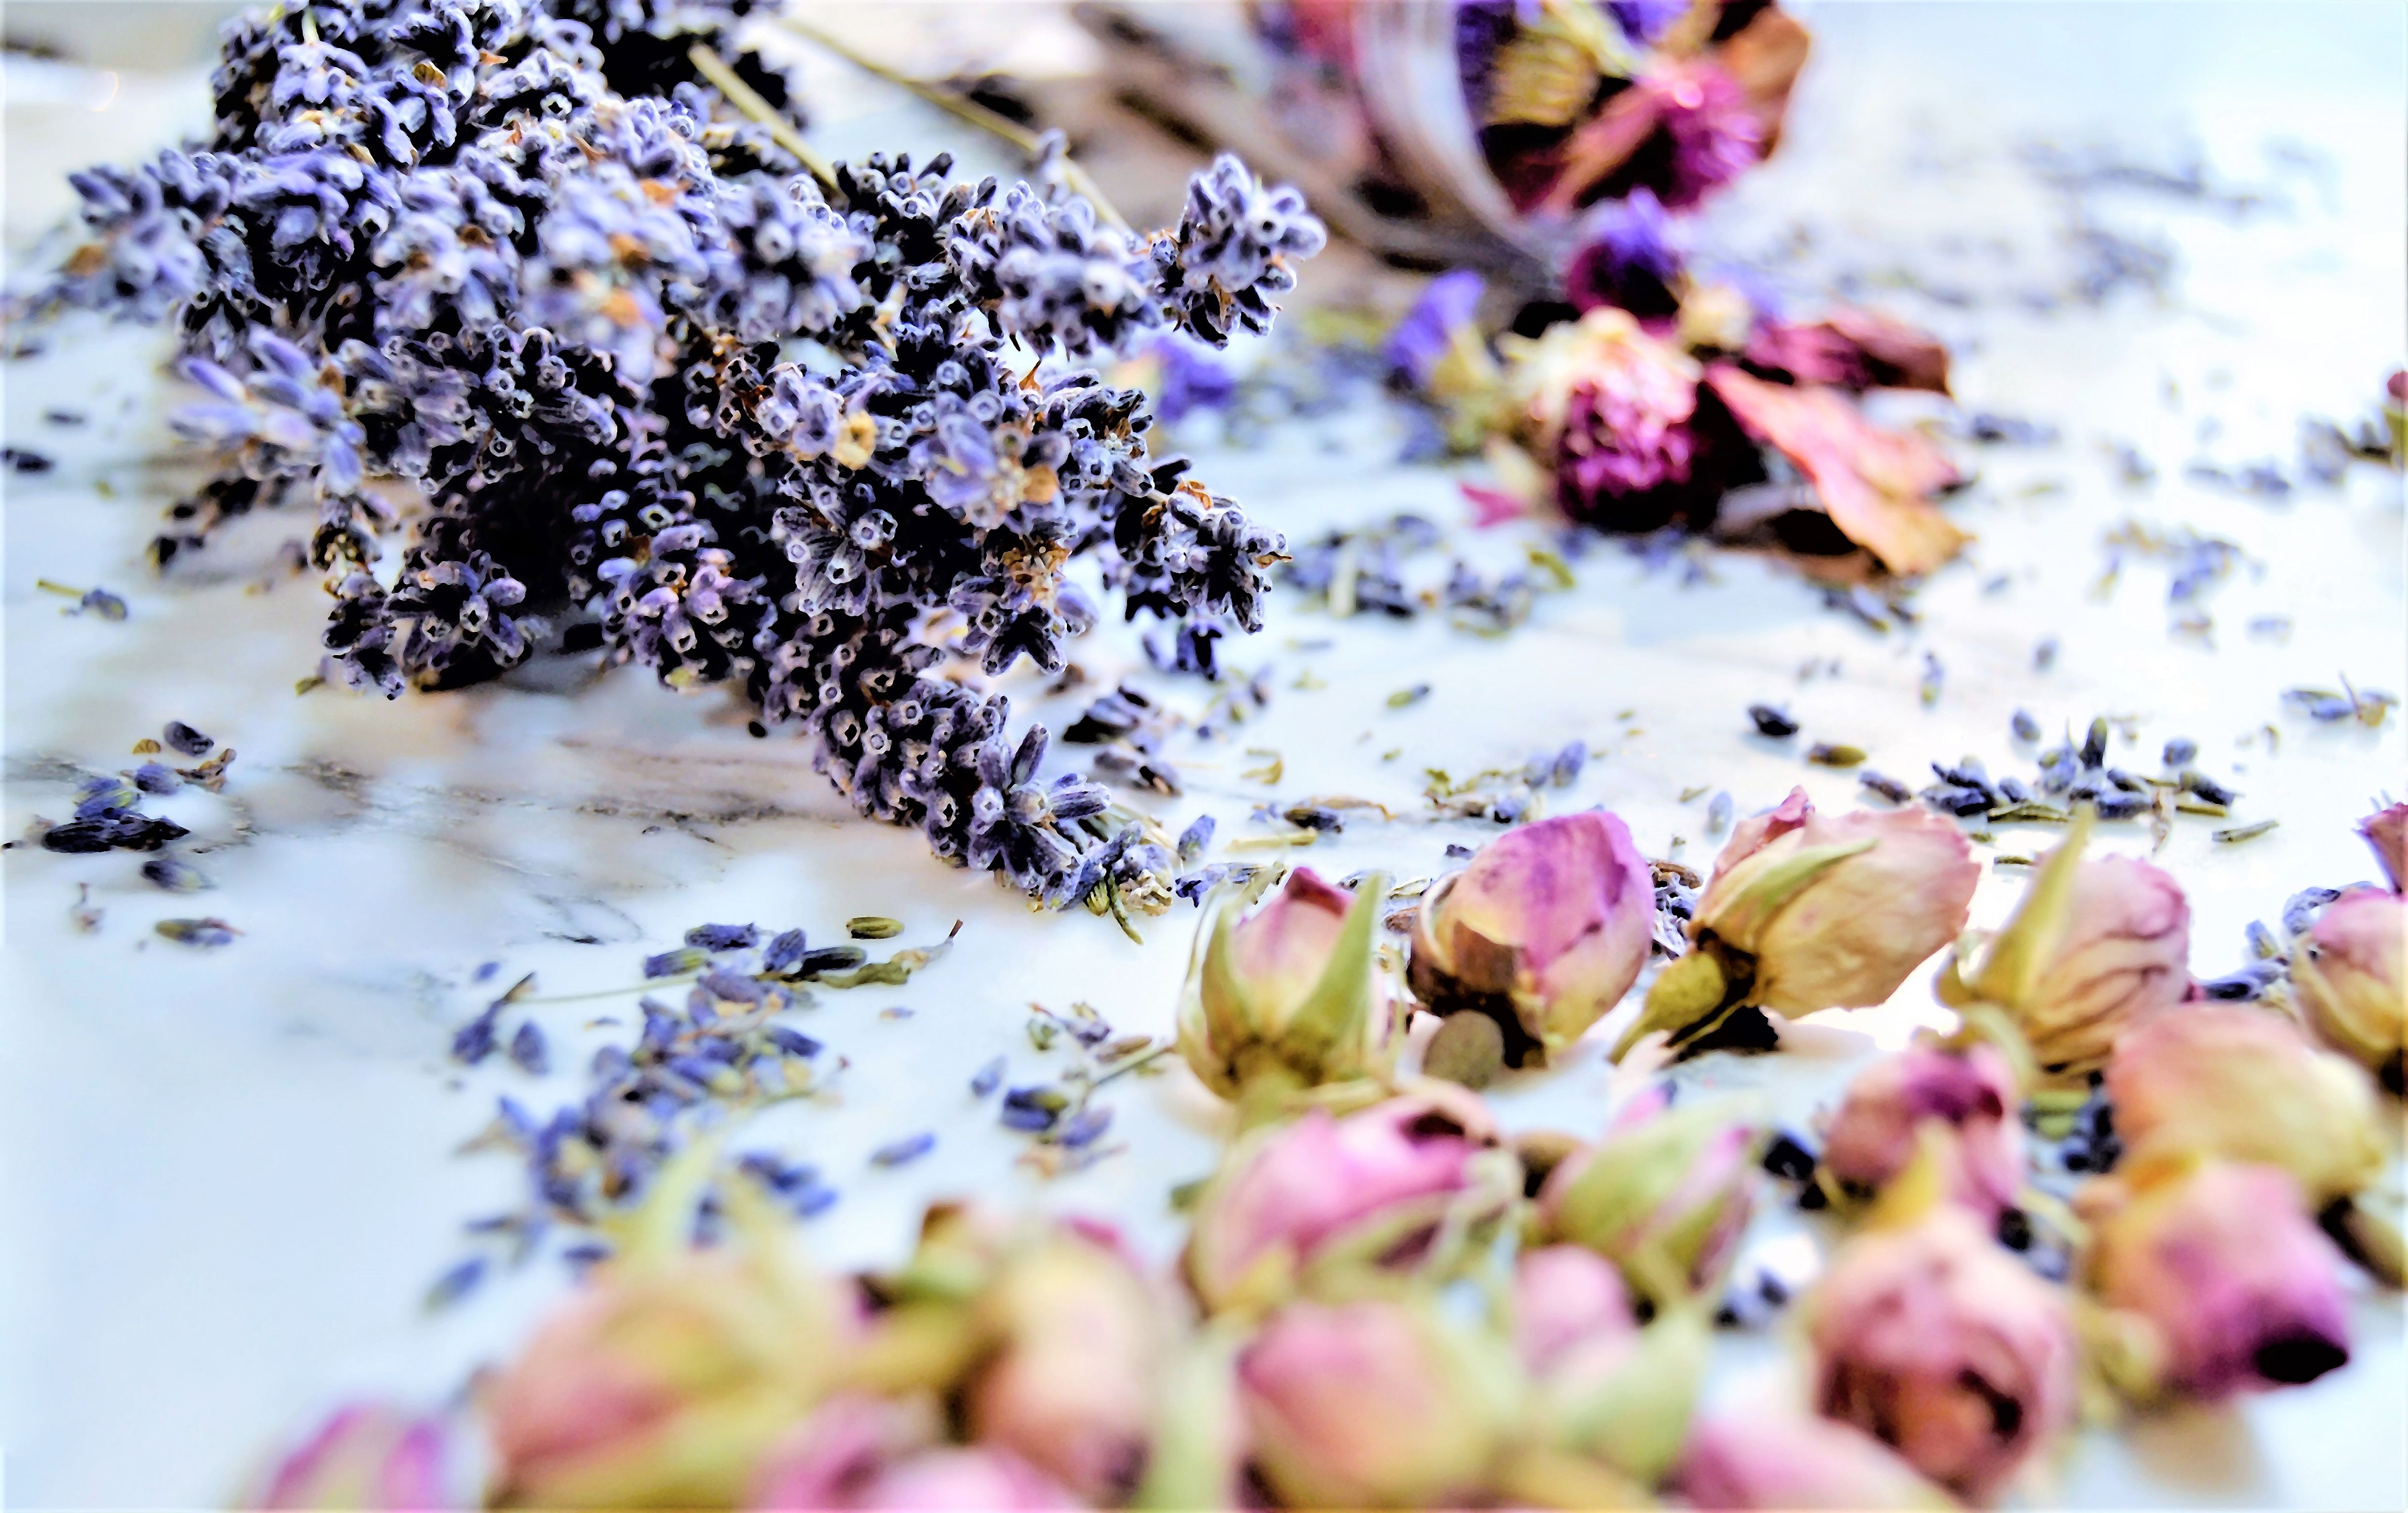 What Sealing Spray Do You Use on Dried Flowers?